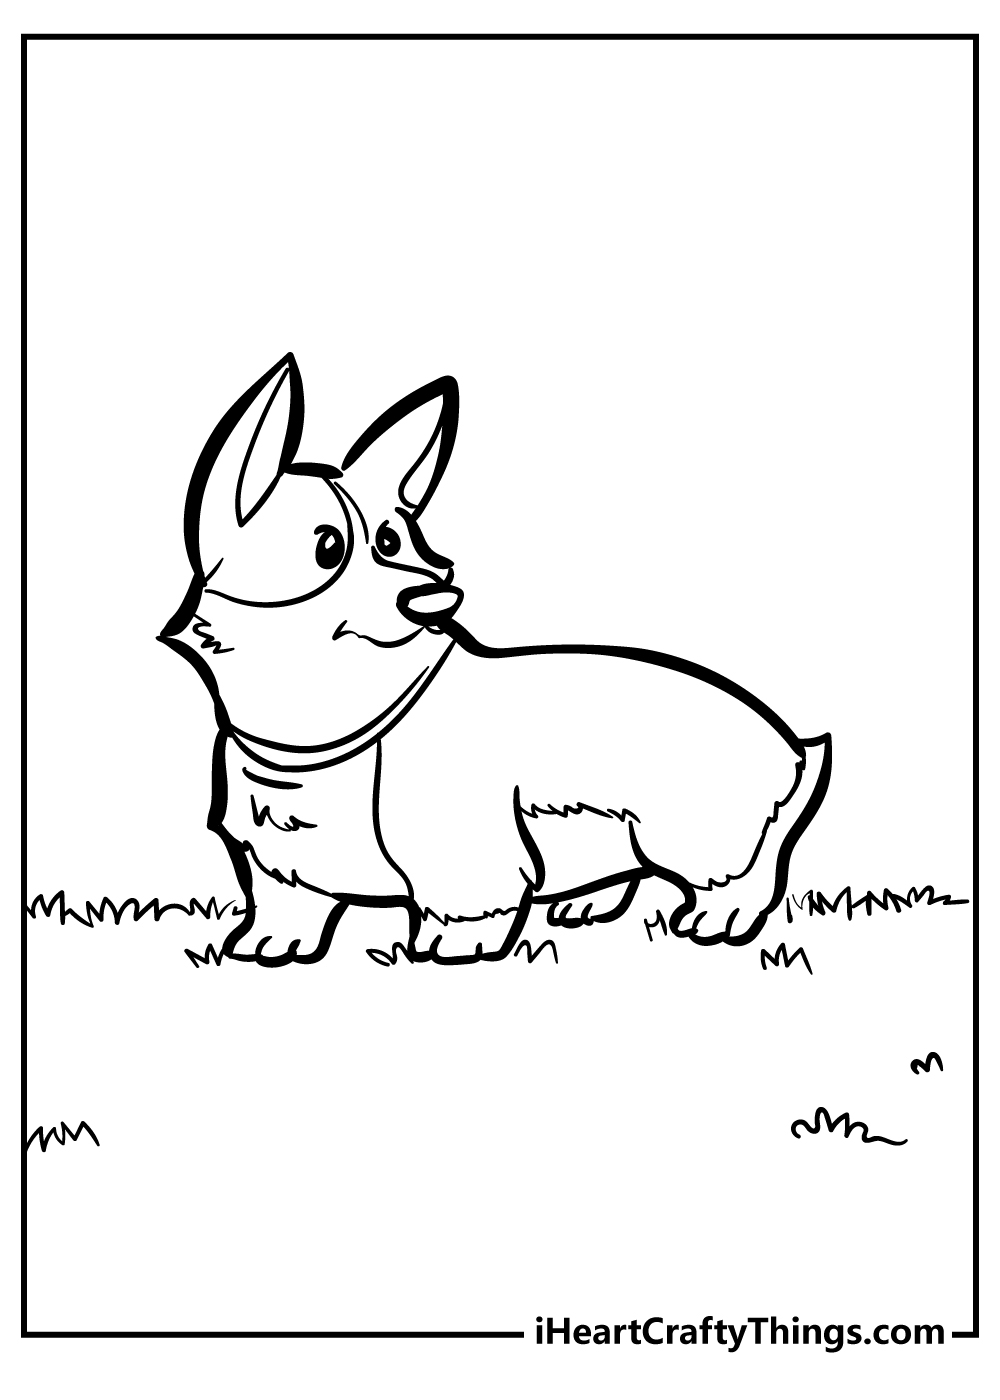 Corgi Coloring Book for adults free download